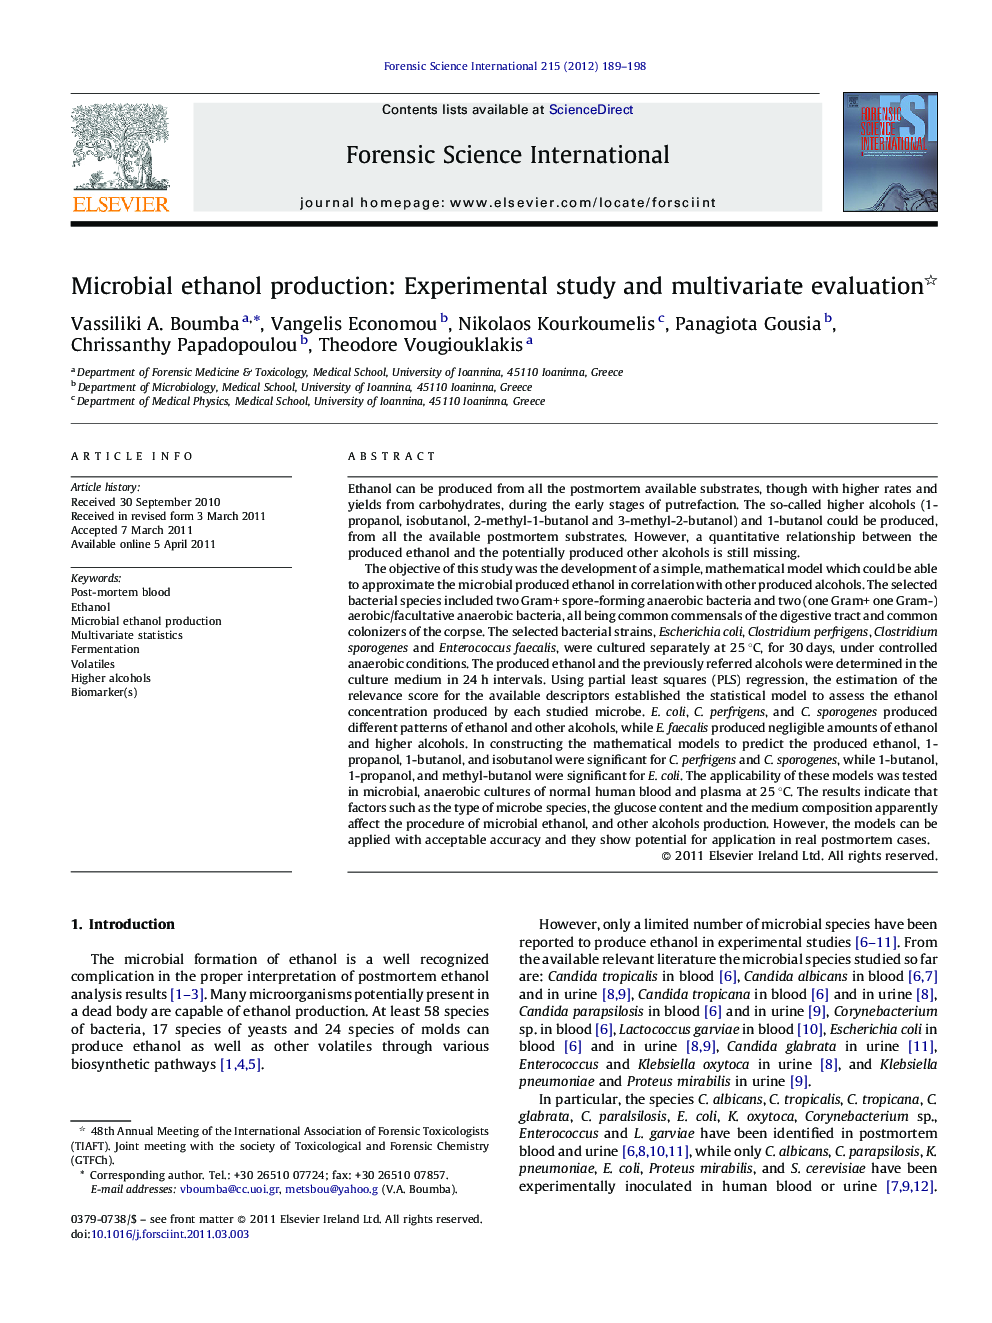 Microbial ethanol production: Experimental study and multivariate evaluation 